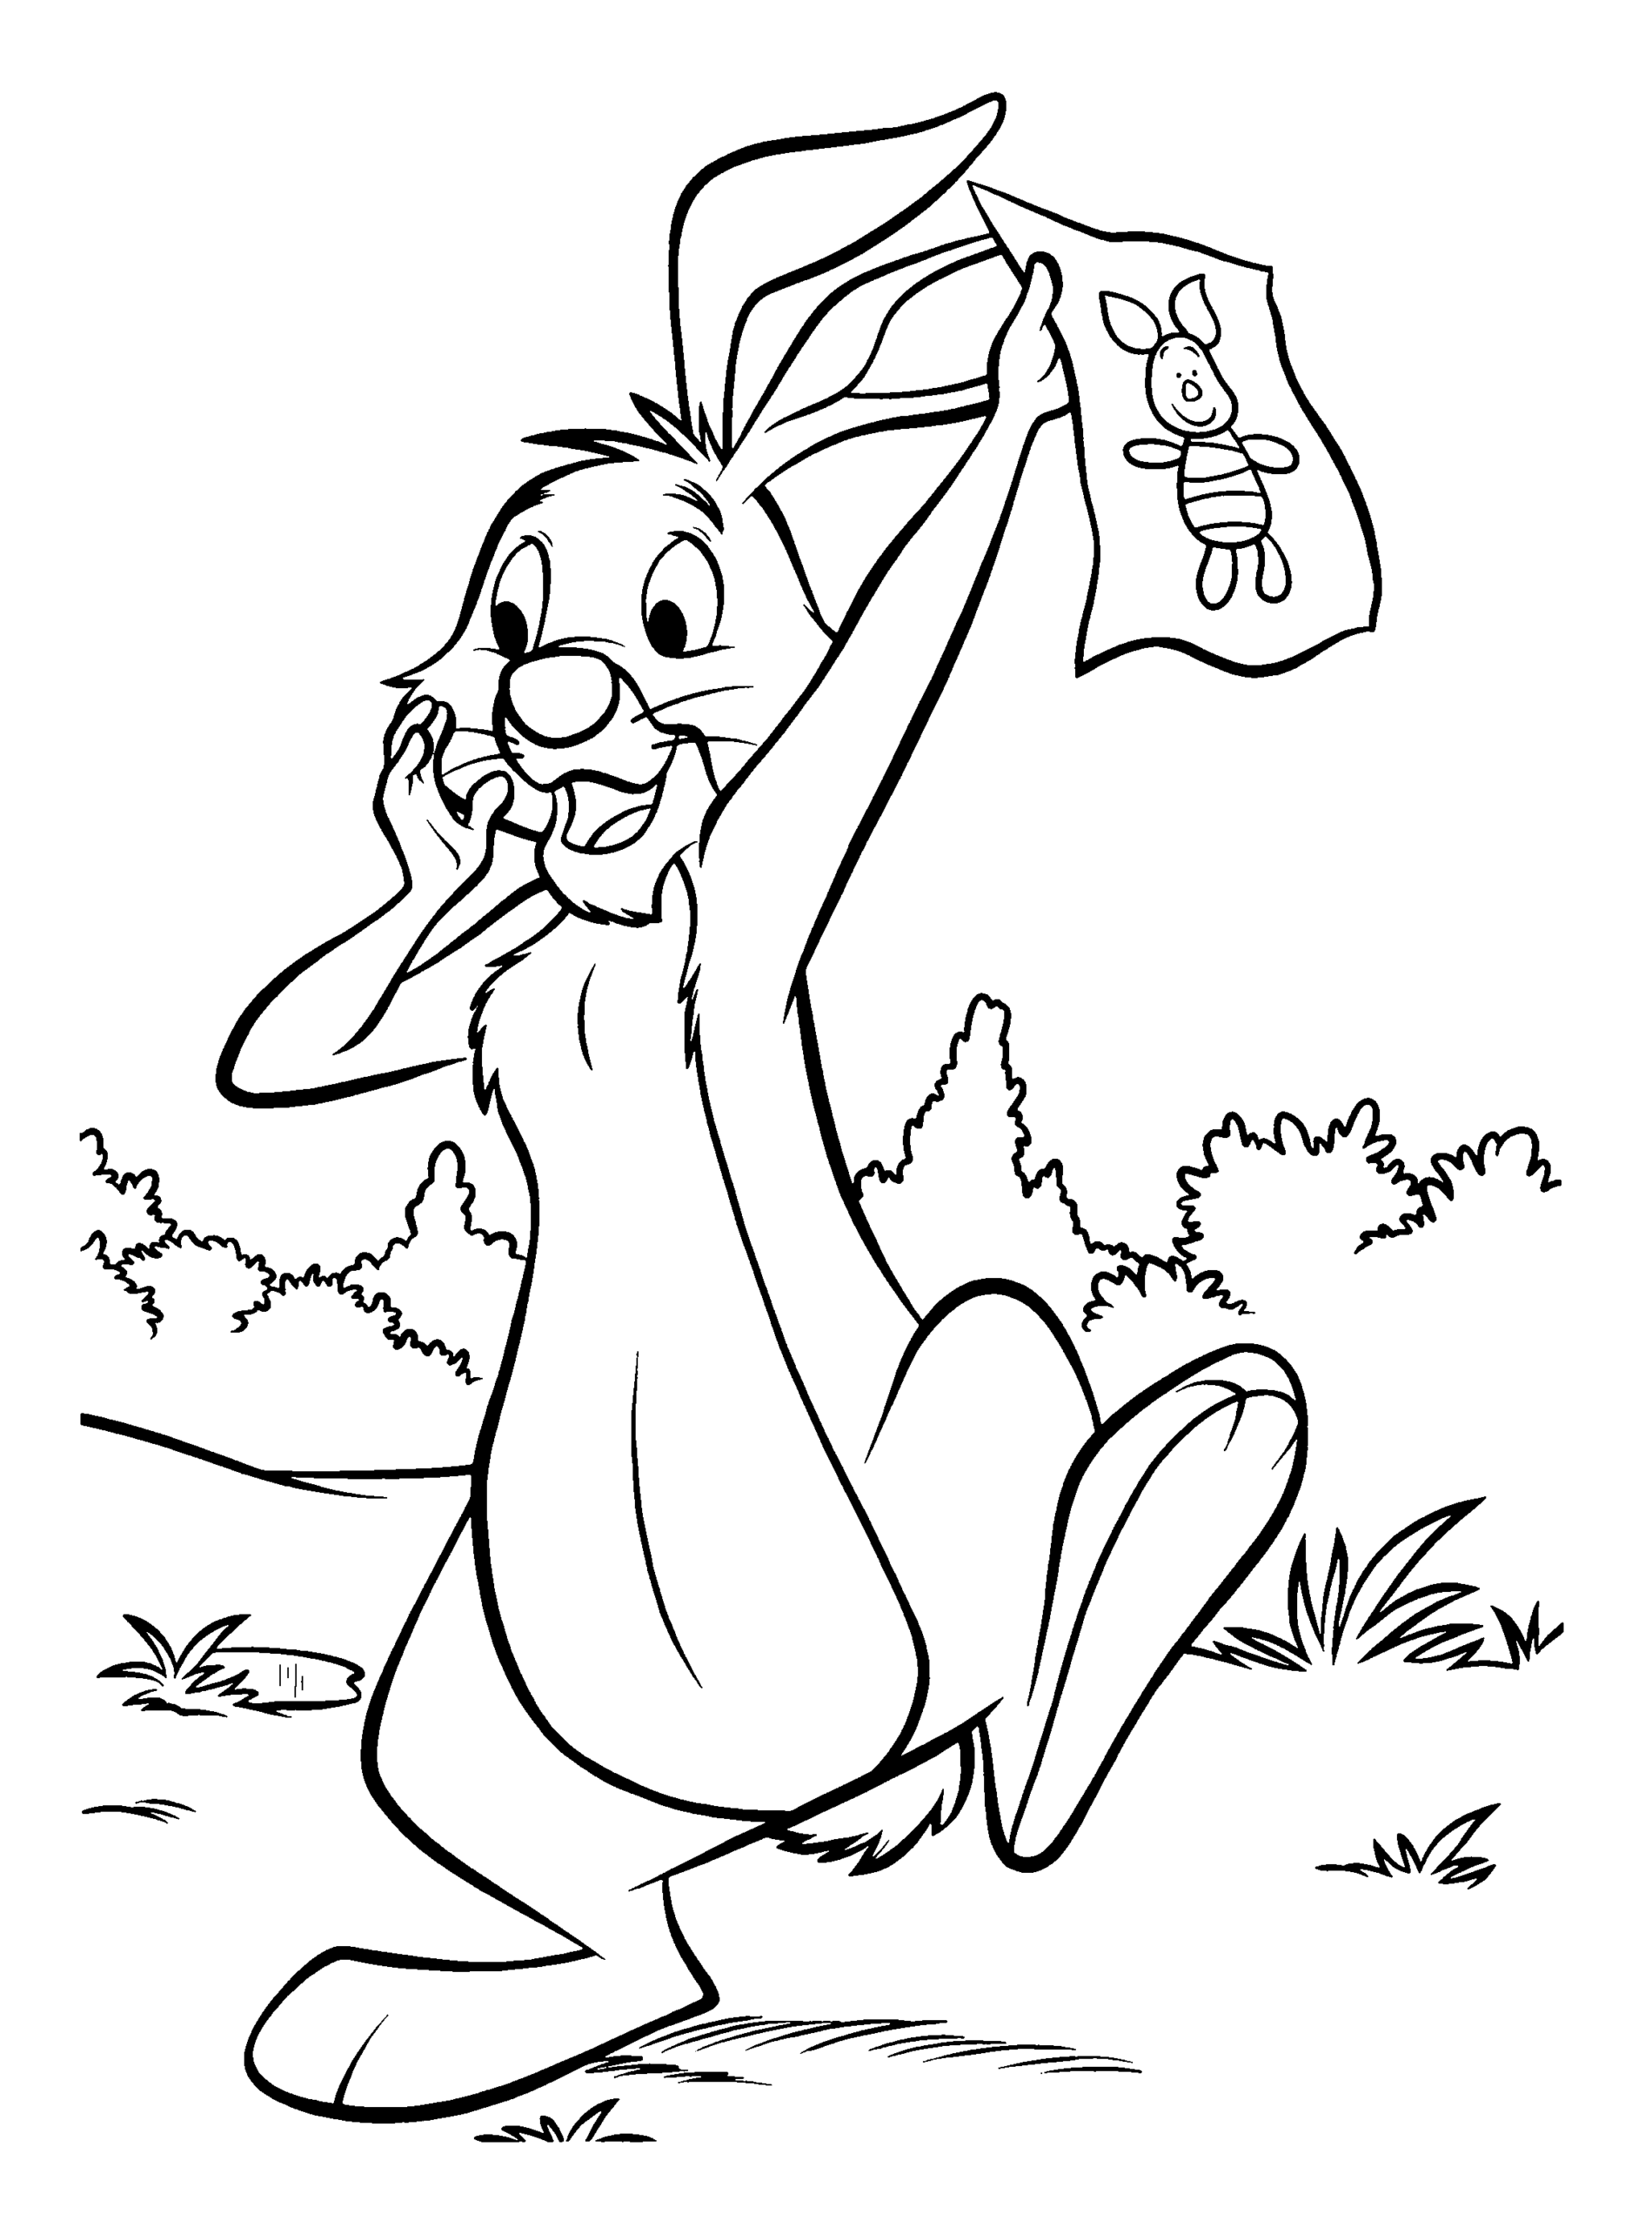 Winnie the Pooh Coloring Pages Cartoons winnie the pooh 9 Printable 2020 7211 Coloring4free